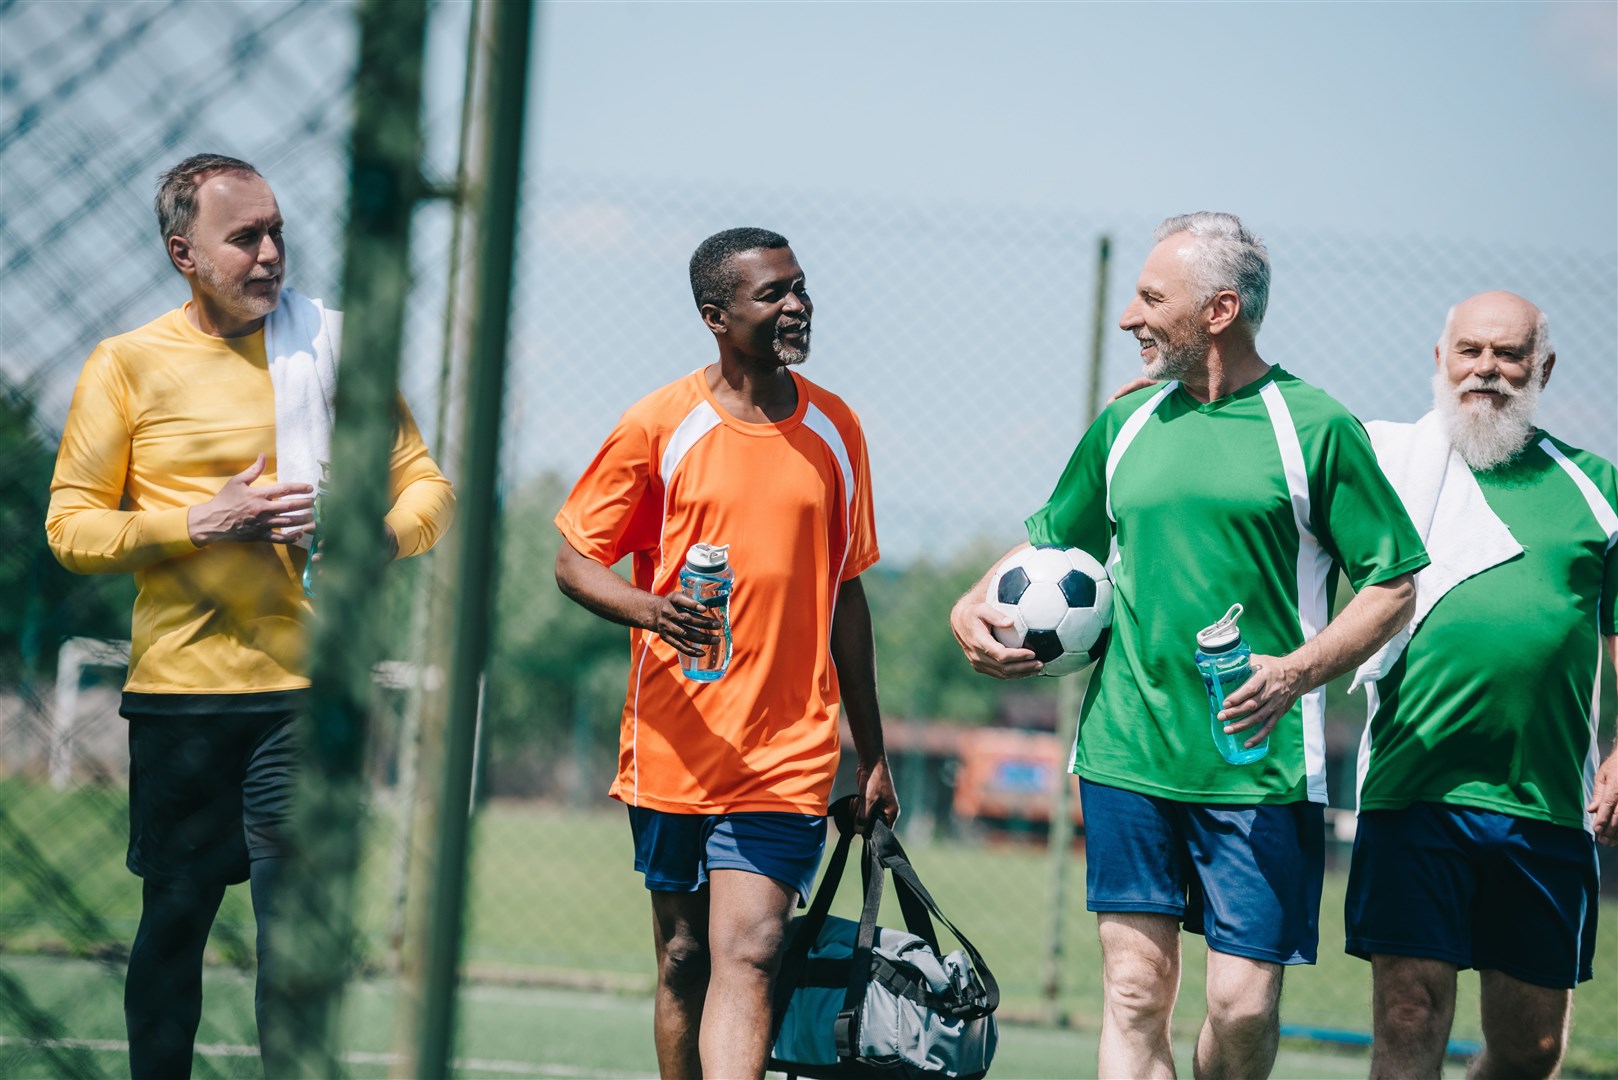 Walking football allows older fans of the game to continue playing.